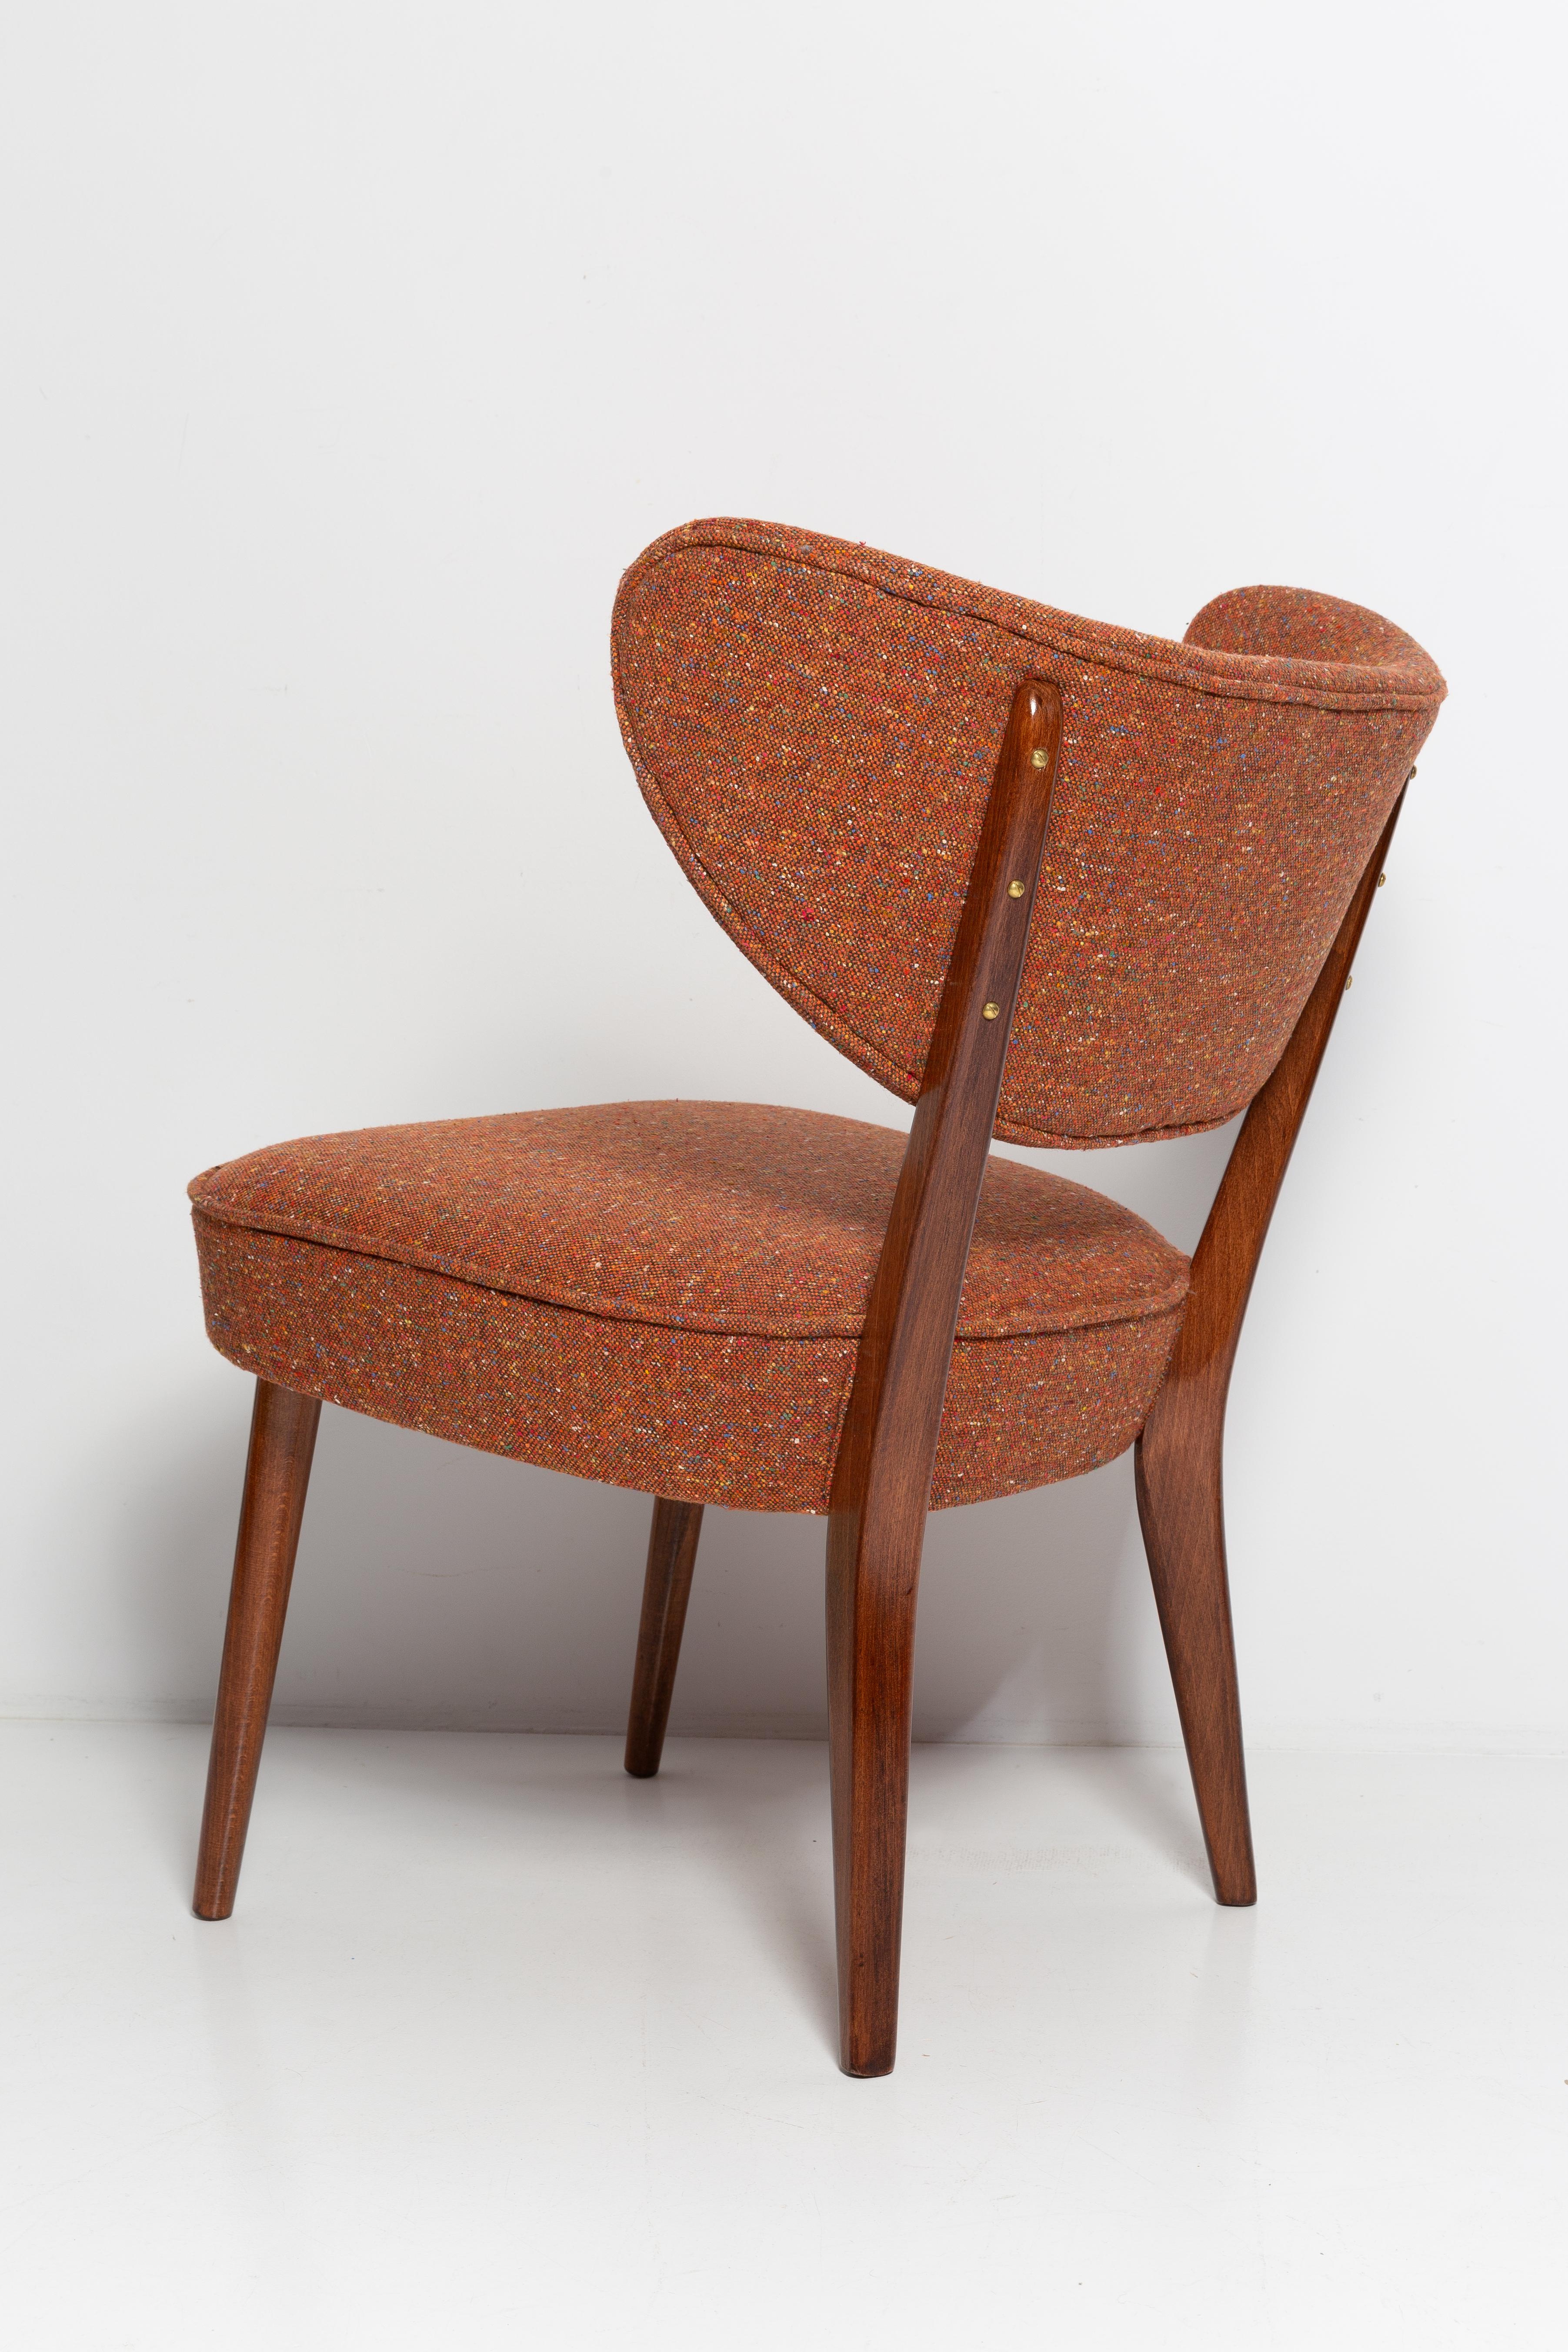 Hand-Crafted Pair of Orange Wool Shell Club Chairs, by Vintola Studio, Europe, Poland For Sale